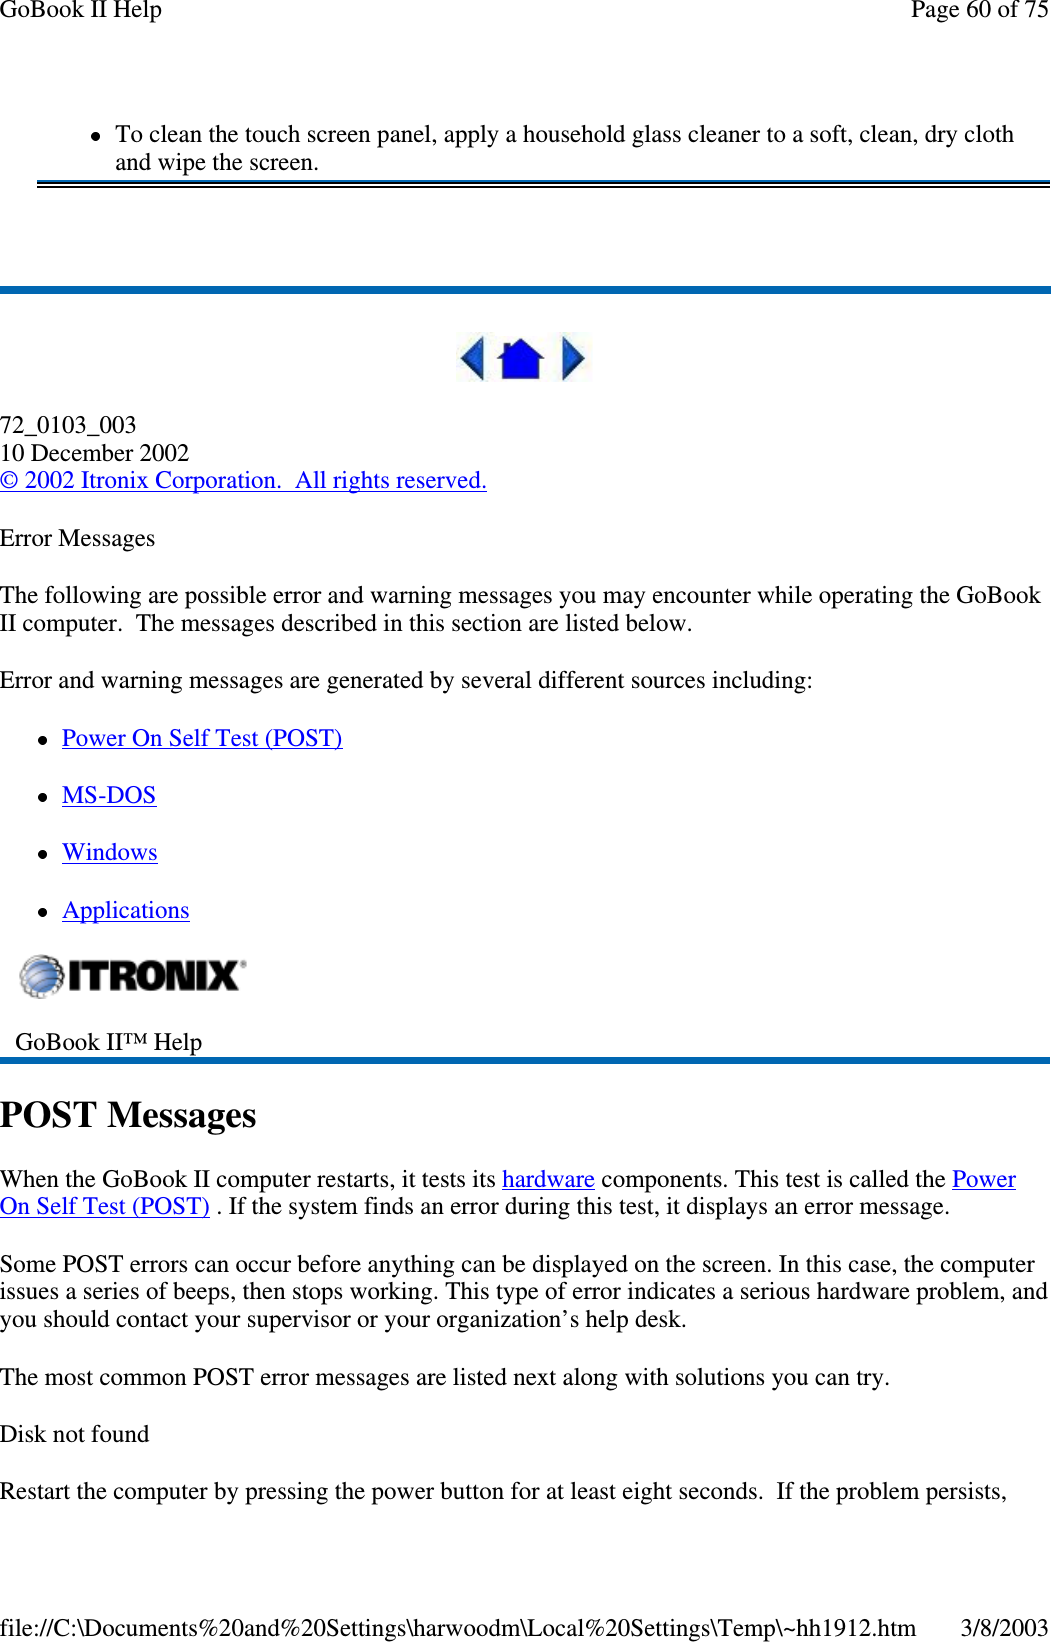 72_0103_00310 December 2002©2002 Itronix Corporation. All rights reserved.Error MessagesThe following are possible error and warning messages you may encounter while operating the GoBookII computer. The messages described in this section are listed below.Error and warning messages are generated by several different sources including:PowerOnSelfTest(POST)MS-DOSWindowsApplicationsPOST MessagesWhen the GoBook II computer restarts, it tests its hardware components. This test is called the PowerOn Self Test (POST) . If the system finds an error during this test, it displays an error message.Some POST errors can occur before anything can be displayed on the screen. In this case, the computerissues a series of beeps, then stops working. This type of error indicates a serious hardware problem, andyou should contact your supervisor or your organization’s help desk.The most common POST error messages are listed next along with solutions you can try.Disk not foundRestart the computer bypressingthepower button for at least eight seconds. If theproblempersists,To clean the touch screen panel, apply a household glass cleaner to a soft, clean, dry clothand wipe the screen.GoBook II™ HelpPage60of75GoBook II Help3/8/2003file://C:\Documents%20and%20Settings\harwoodm\Local%20Settings\Temp\~hh1912.htm